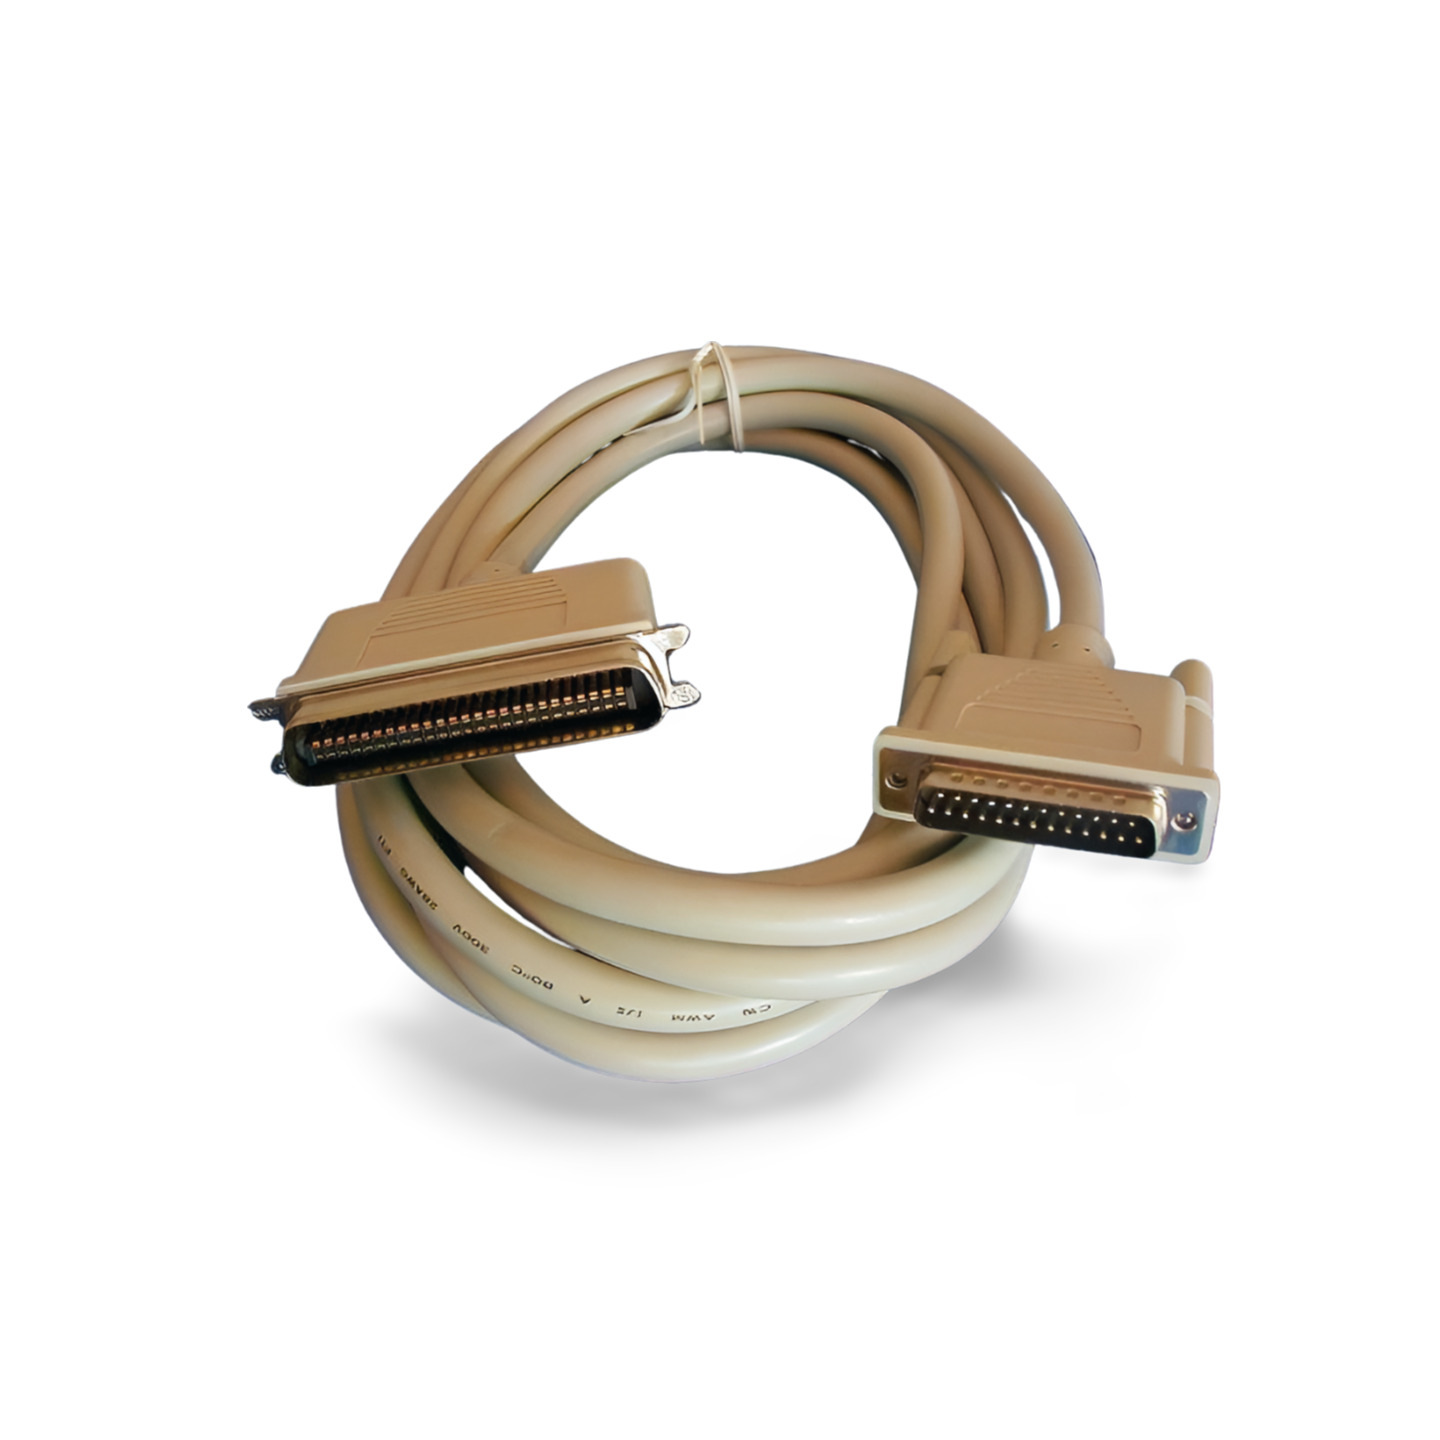 12ft SCSI-I CN50 to DB25 Male Cable Heavy Duty - Beige